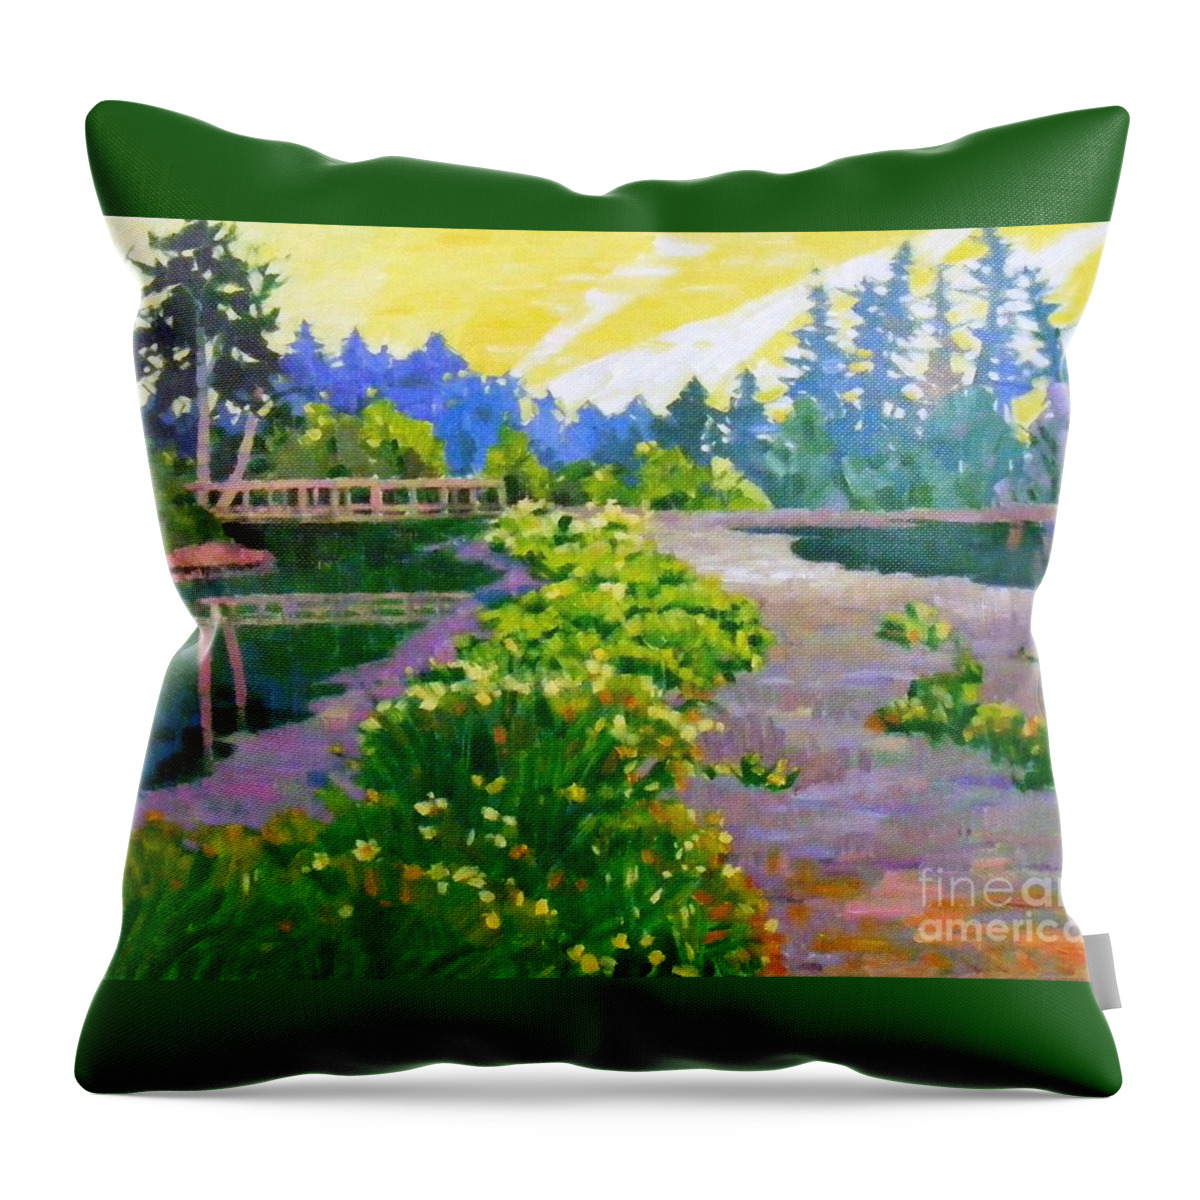 Drizzling Throw Pillow featuring the painting Drizzling seaside by Celine K Yong